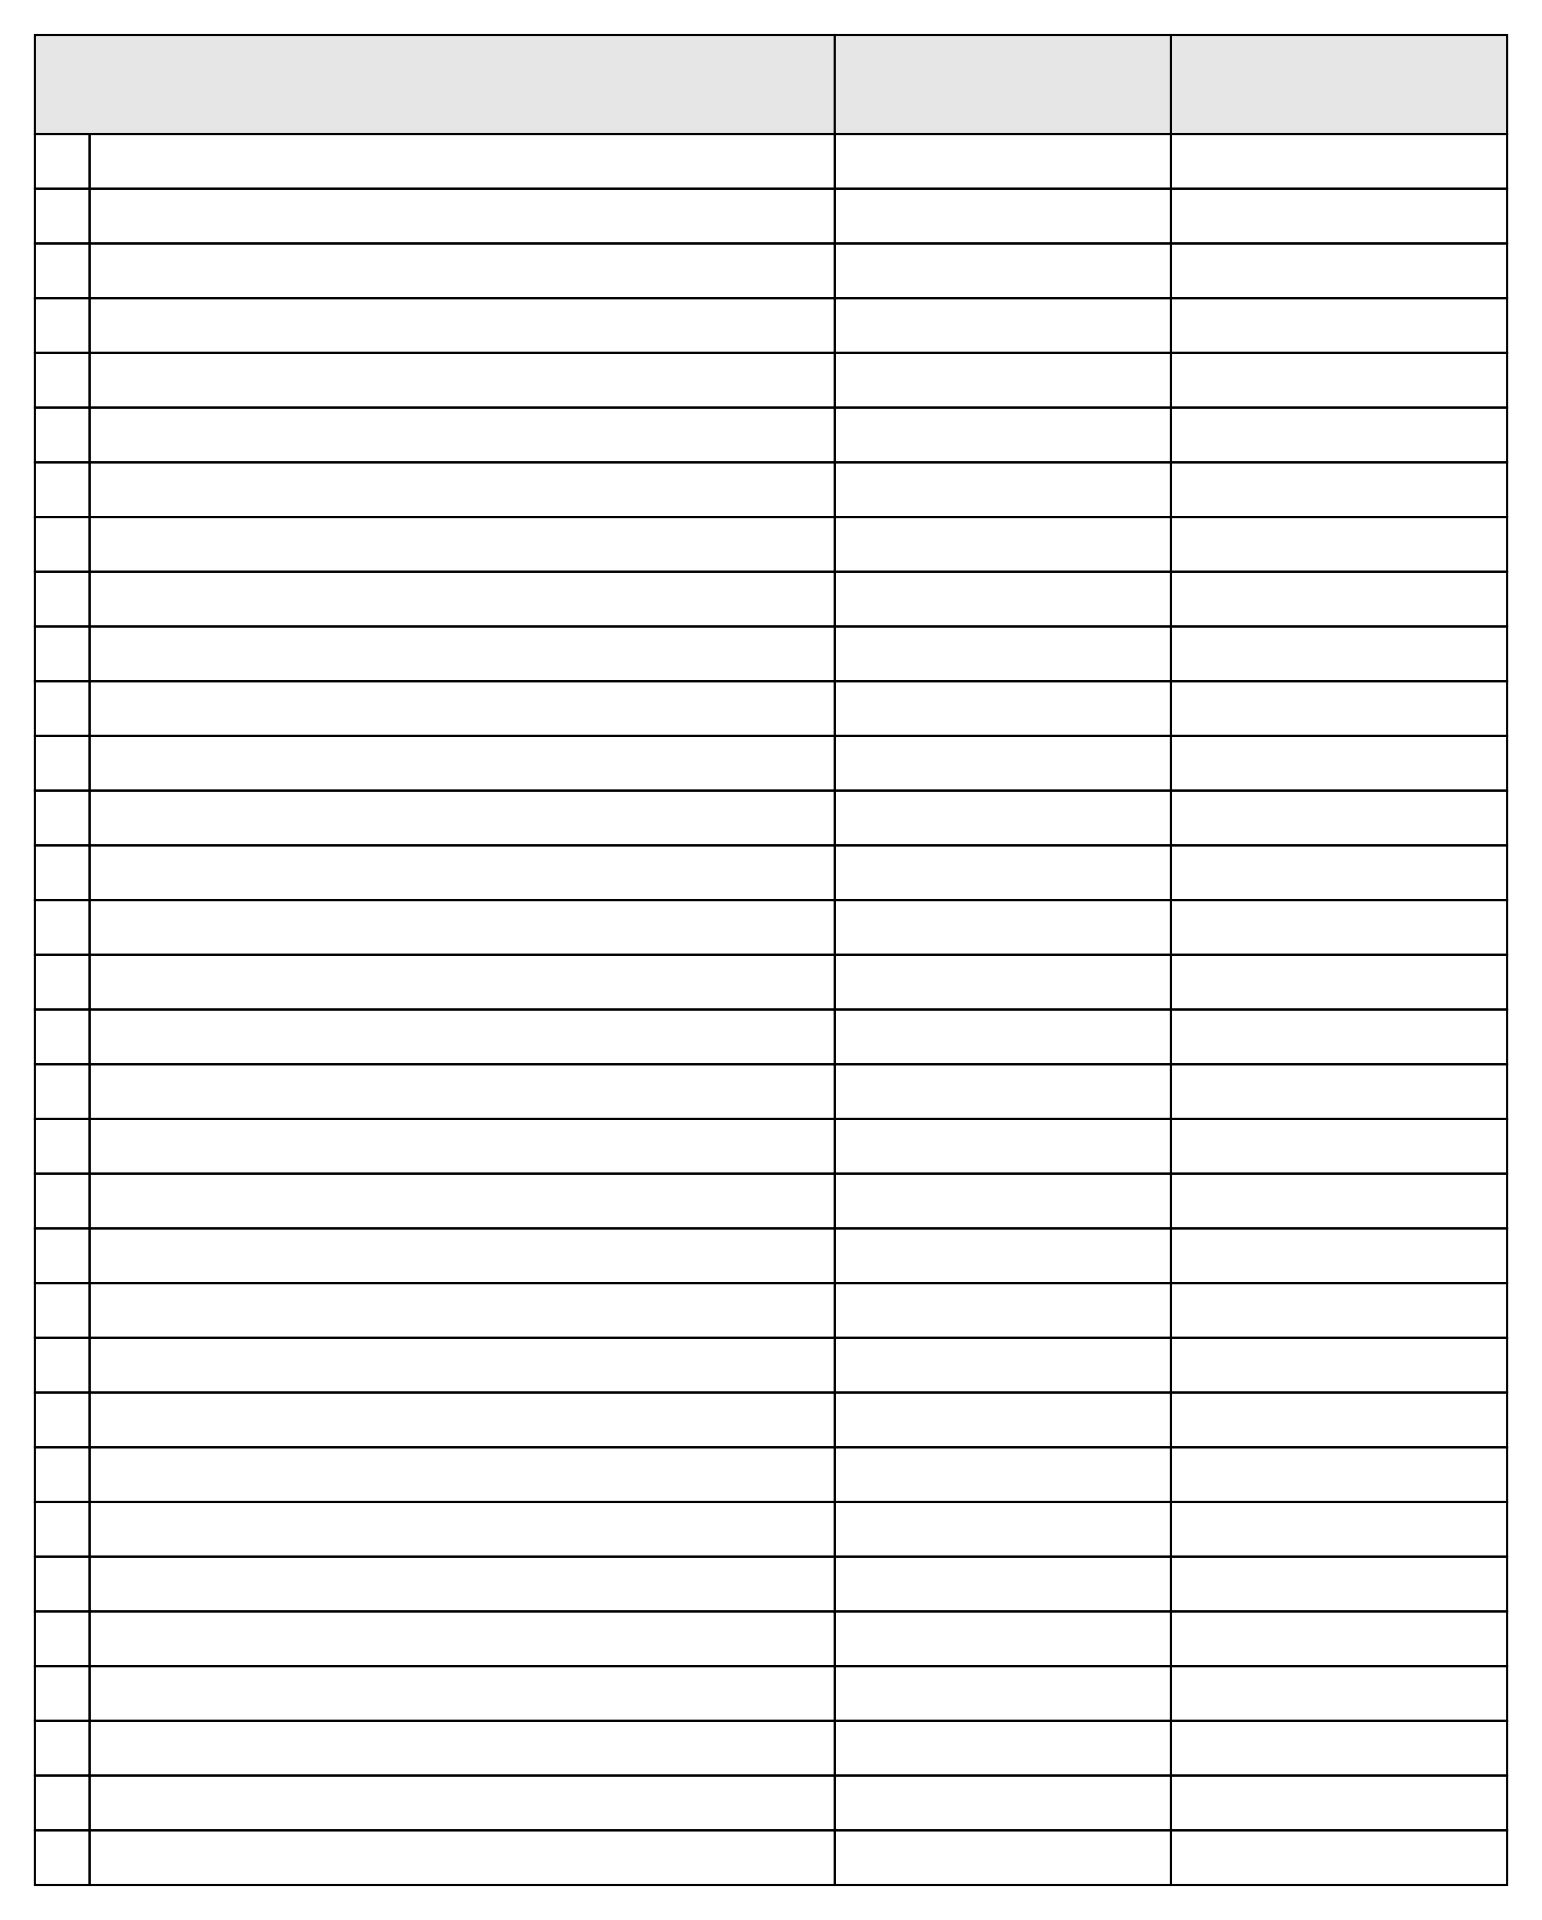 printable-spreadsheets-with-columns-and-rows-printables-template-free